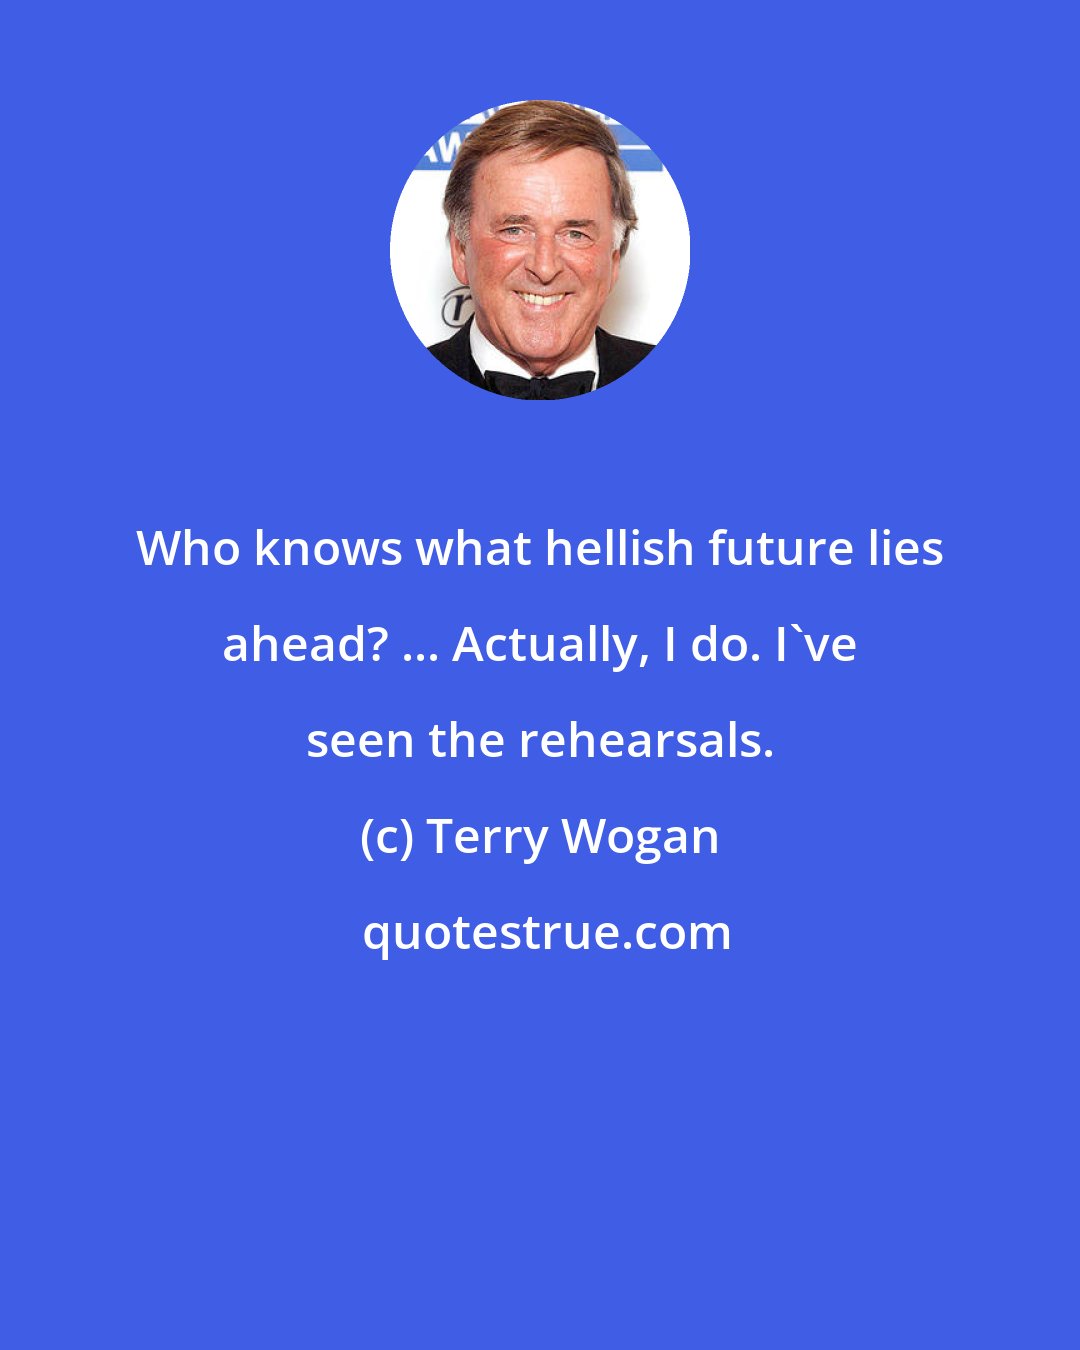 Terry Wogan: Who knows what hellish future lies ahead? ... Actually, I do. I've seen the rehearsals.